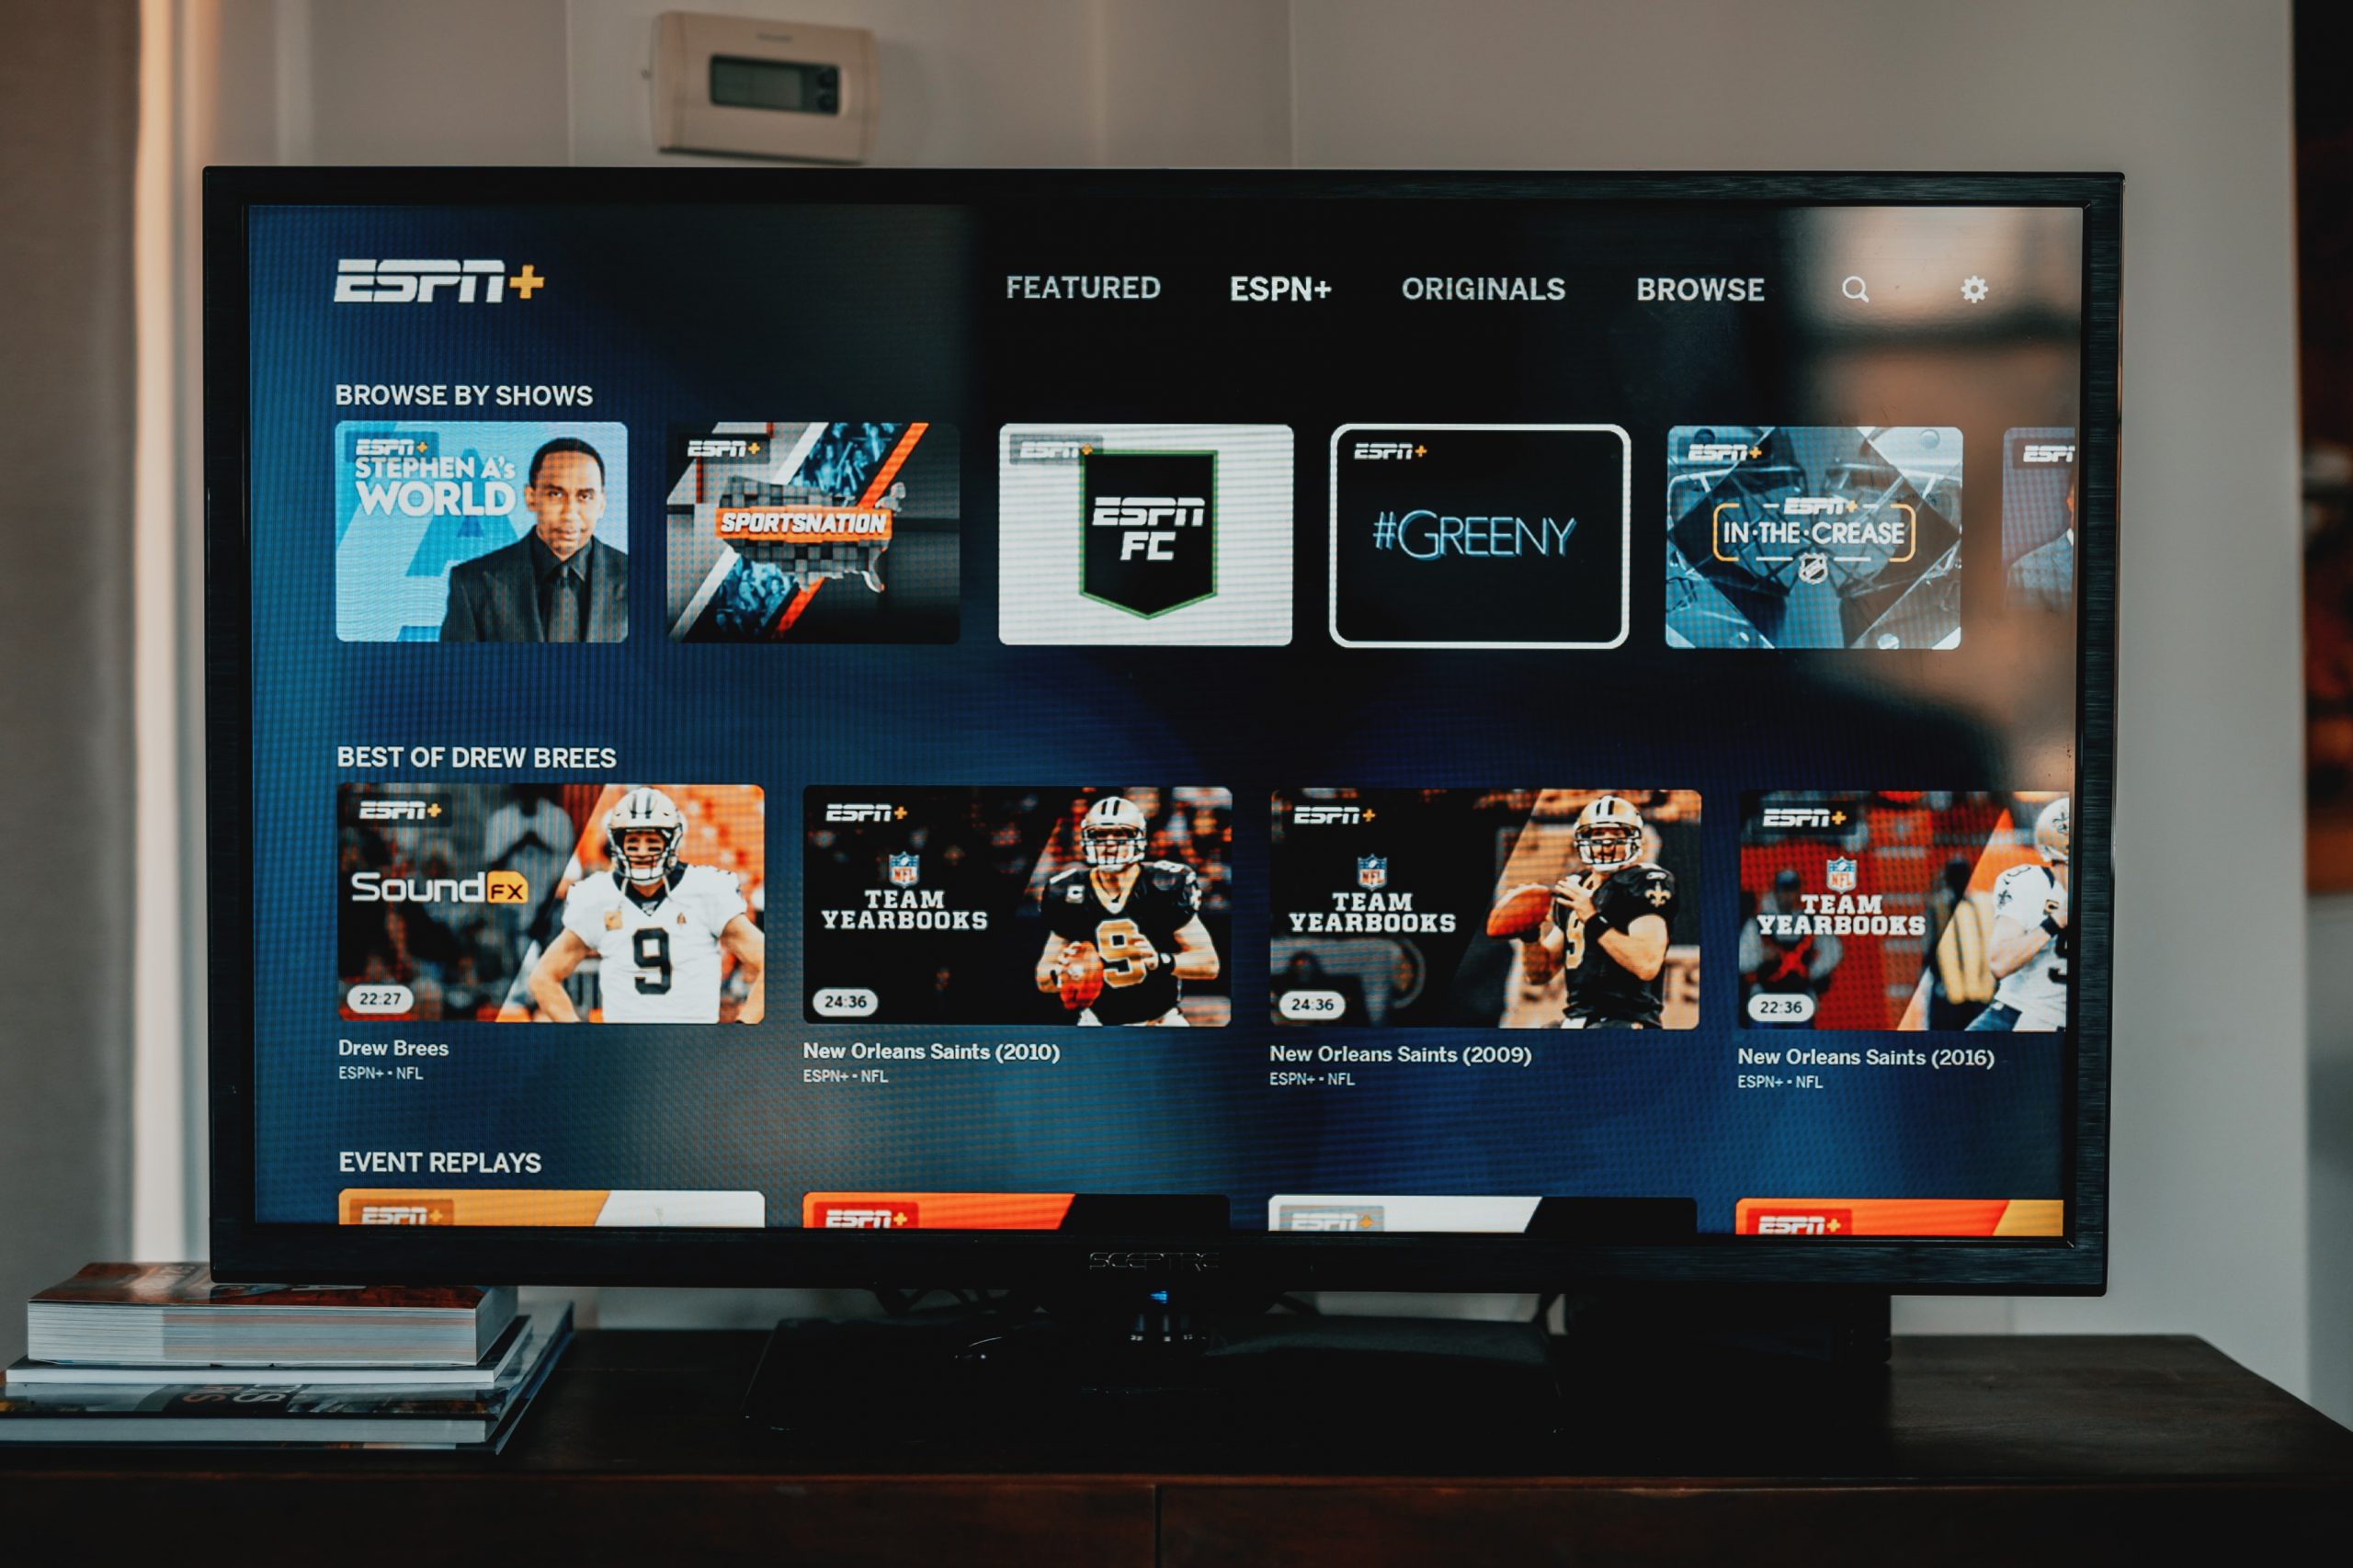 In an article about sports coverage, a photograph of a flat screen TV with ESPN+ on the screen.